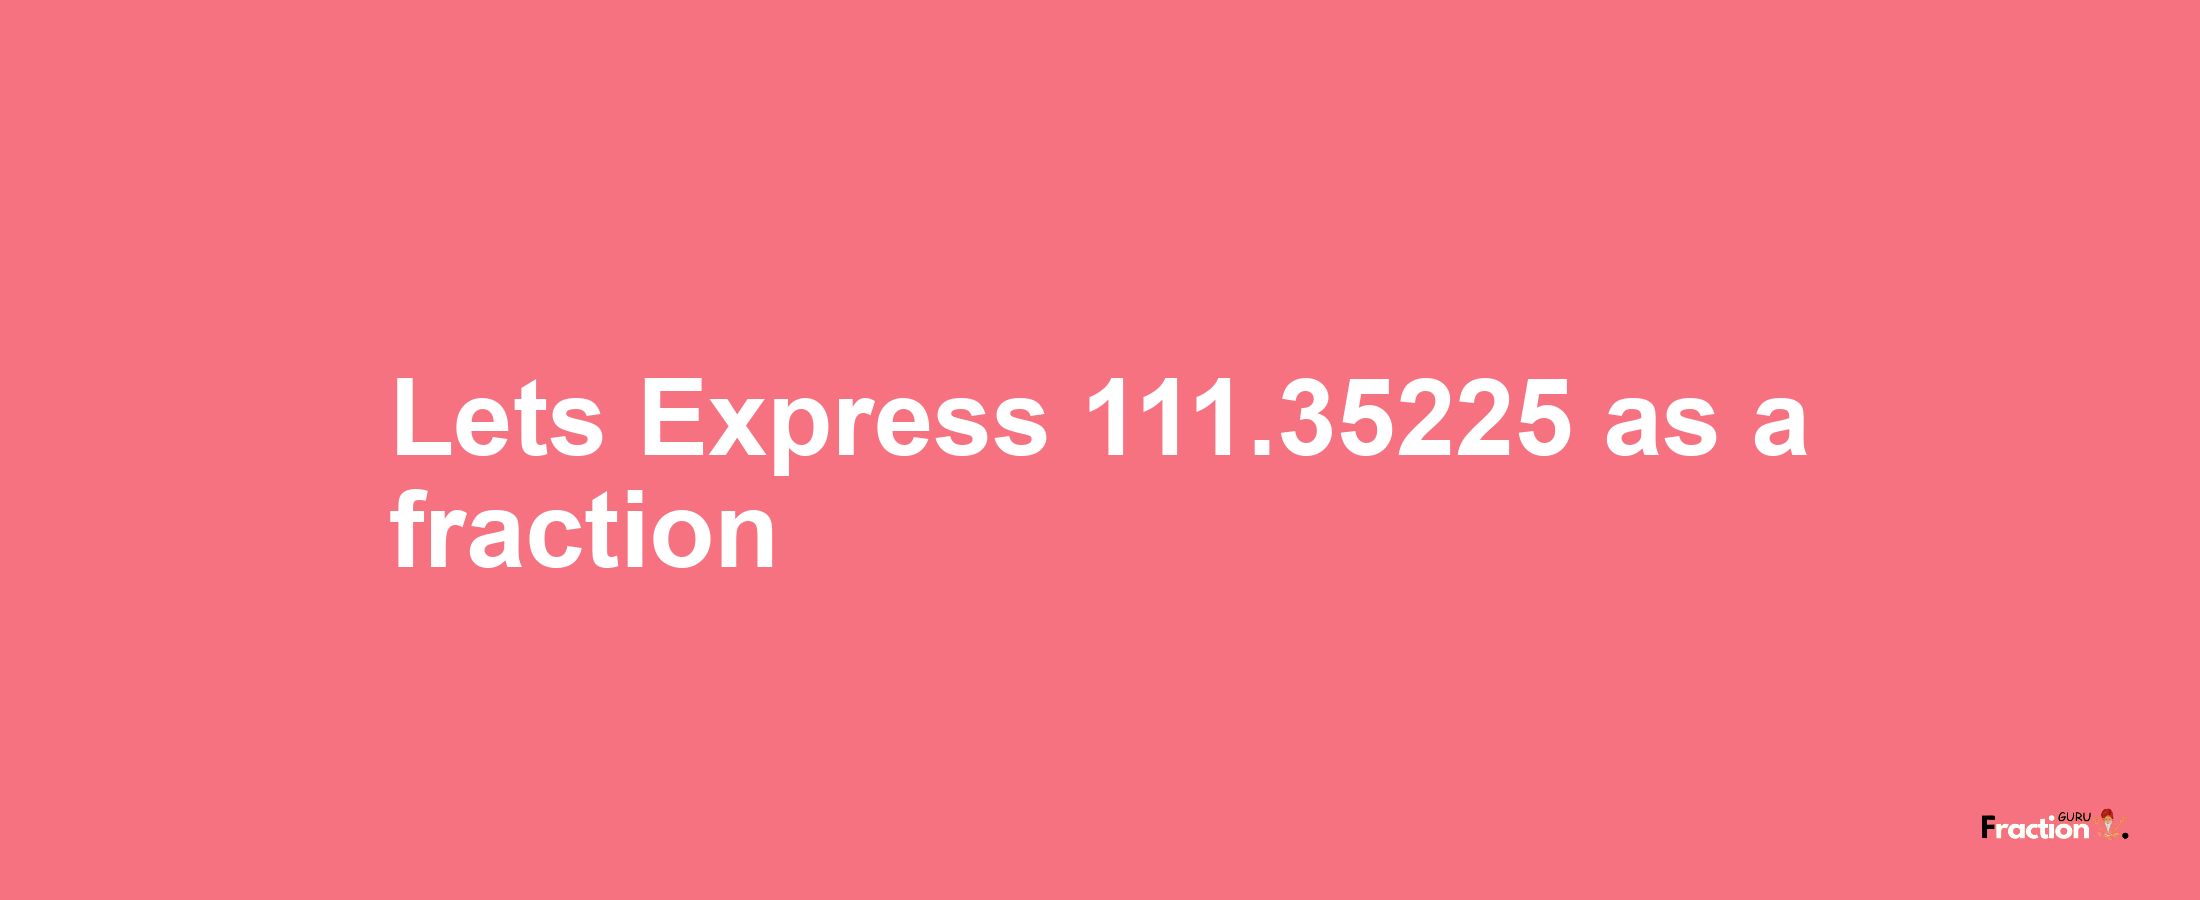 Lets Express 111.35225 as afraction